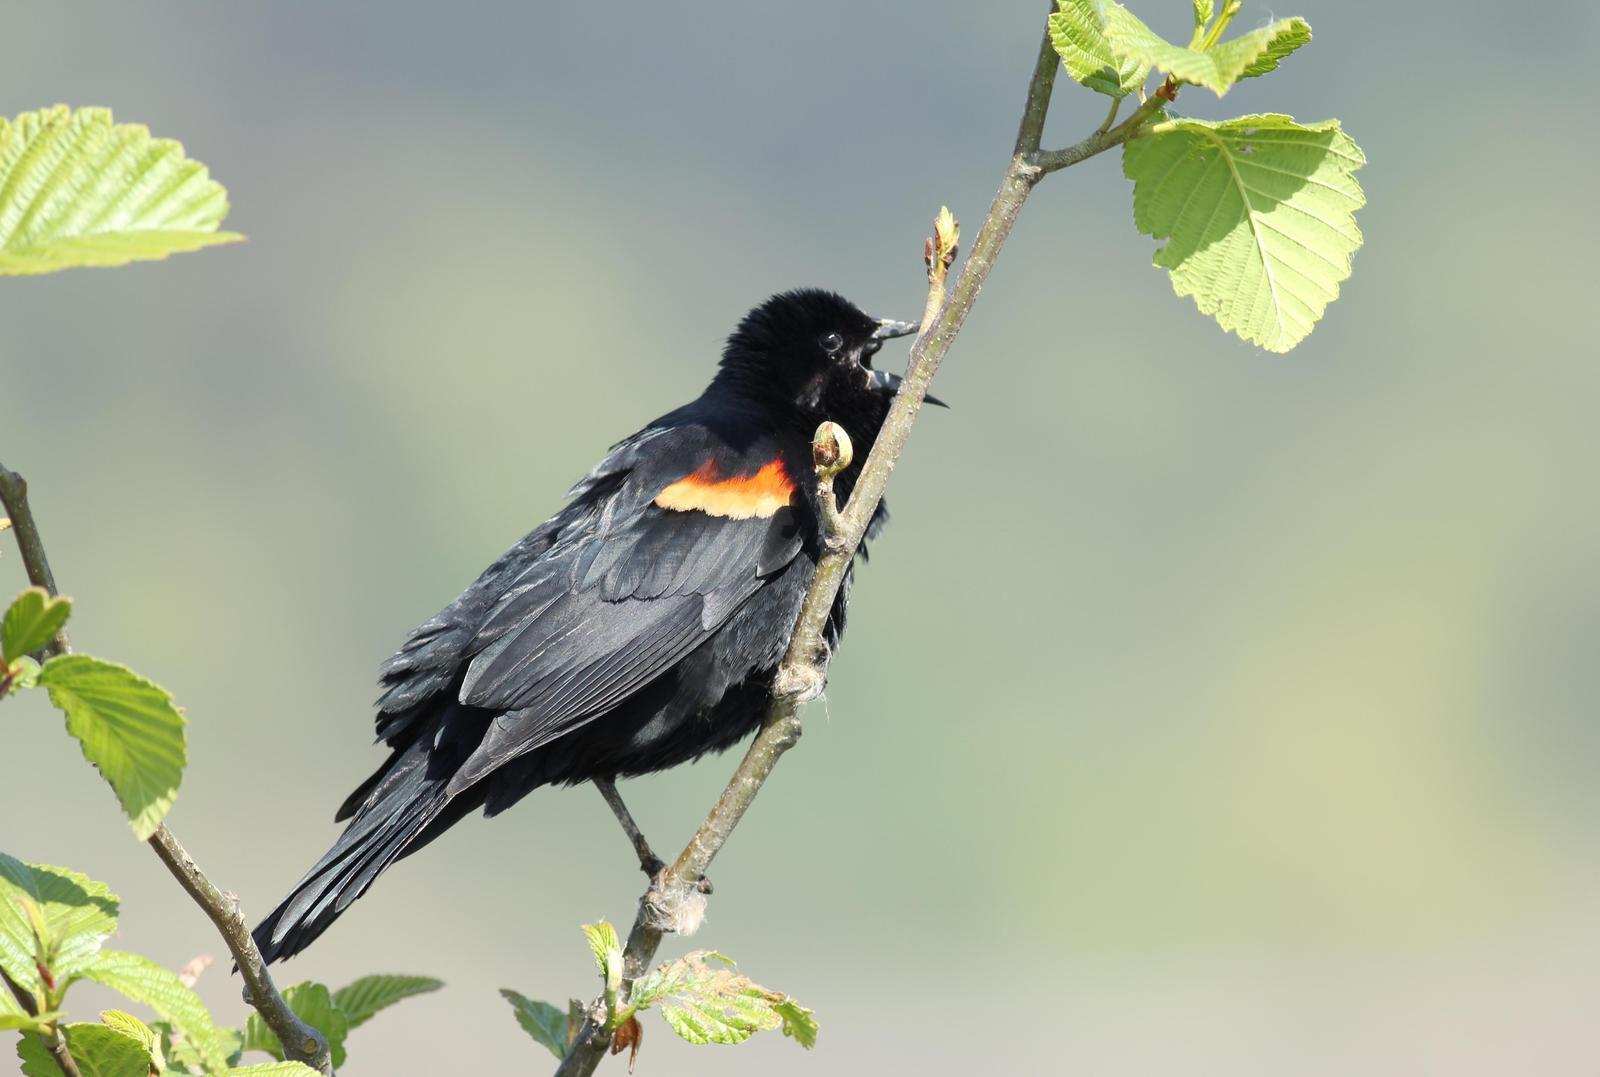 Red-winged Blackbird Photo by Kathryn Keith